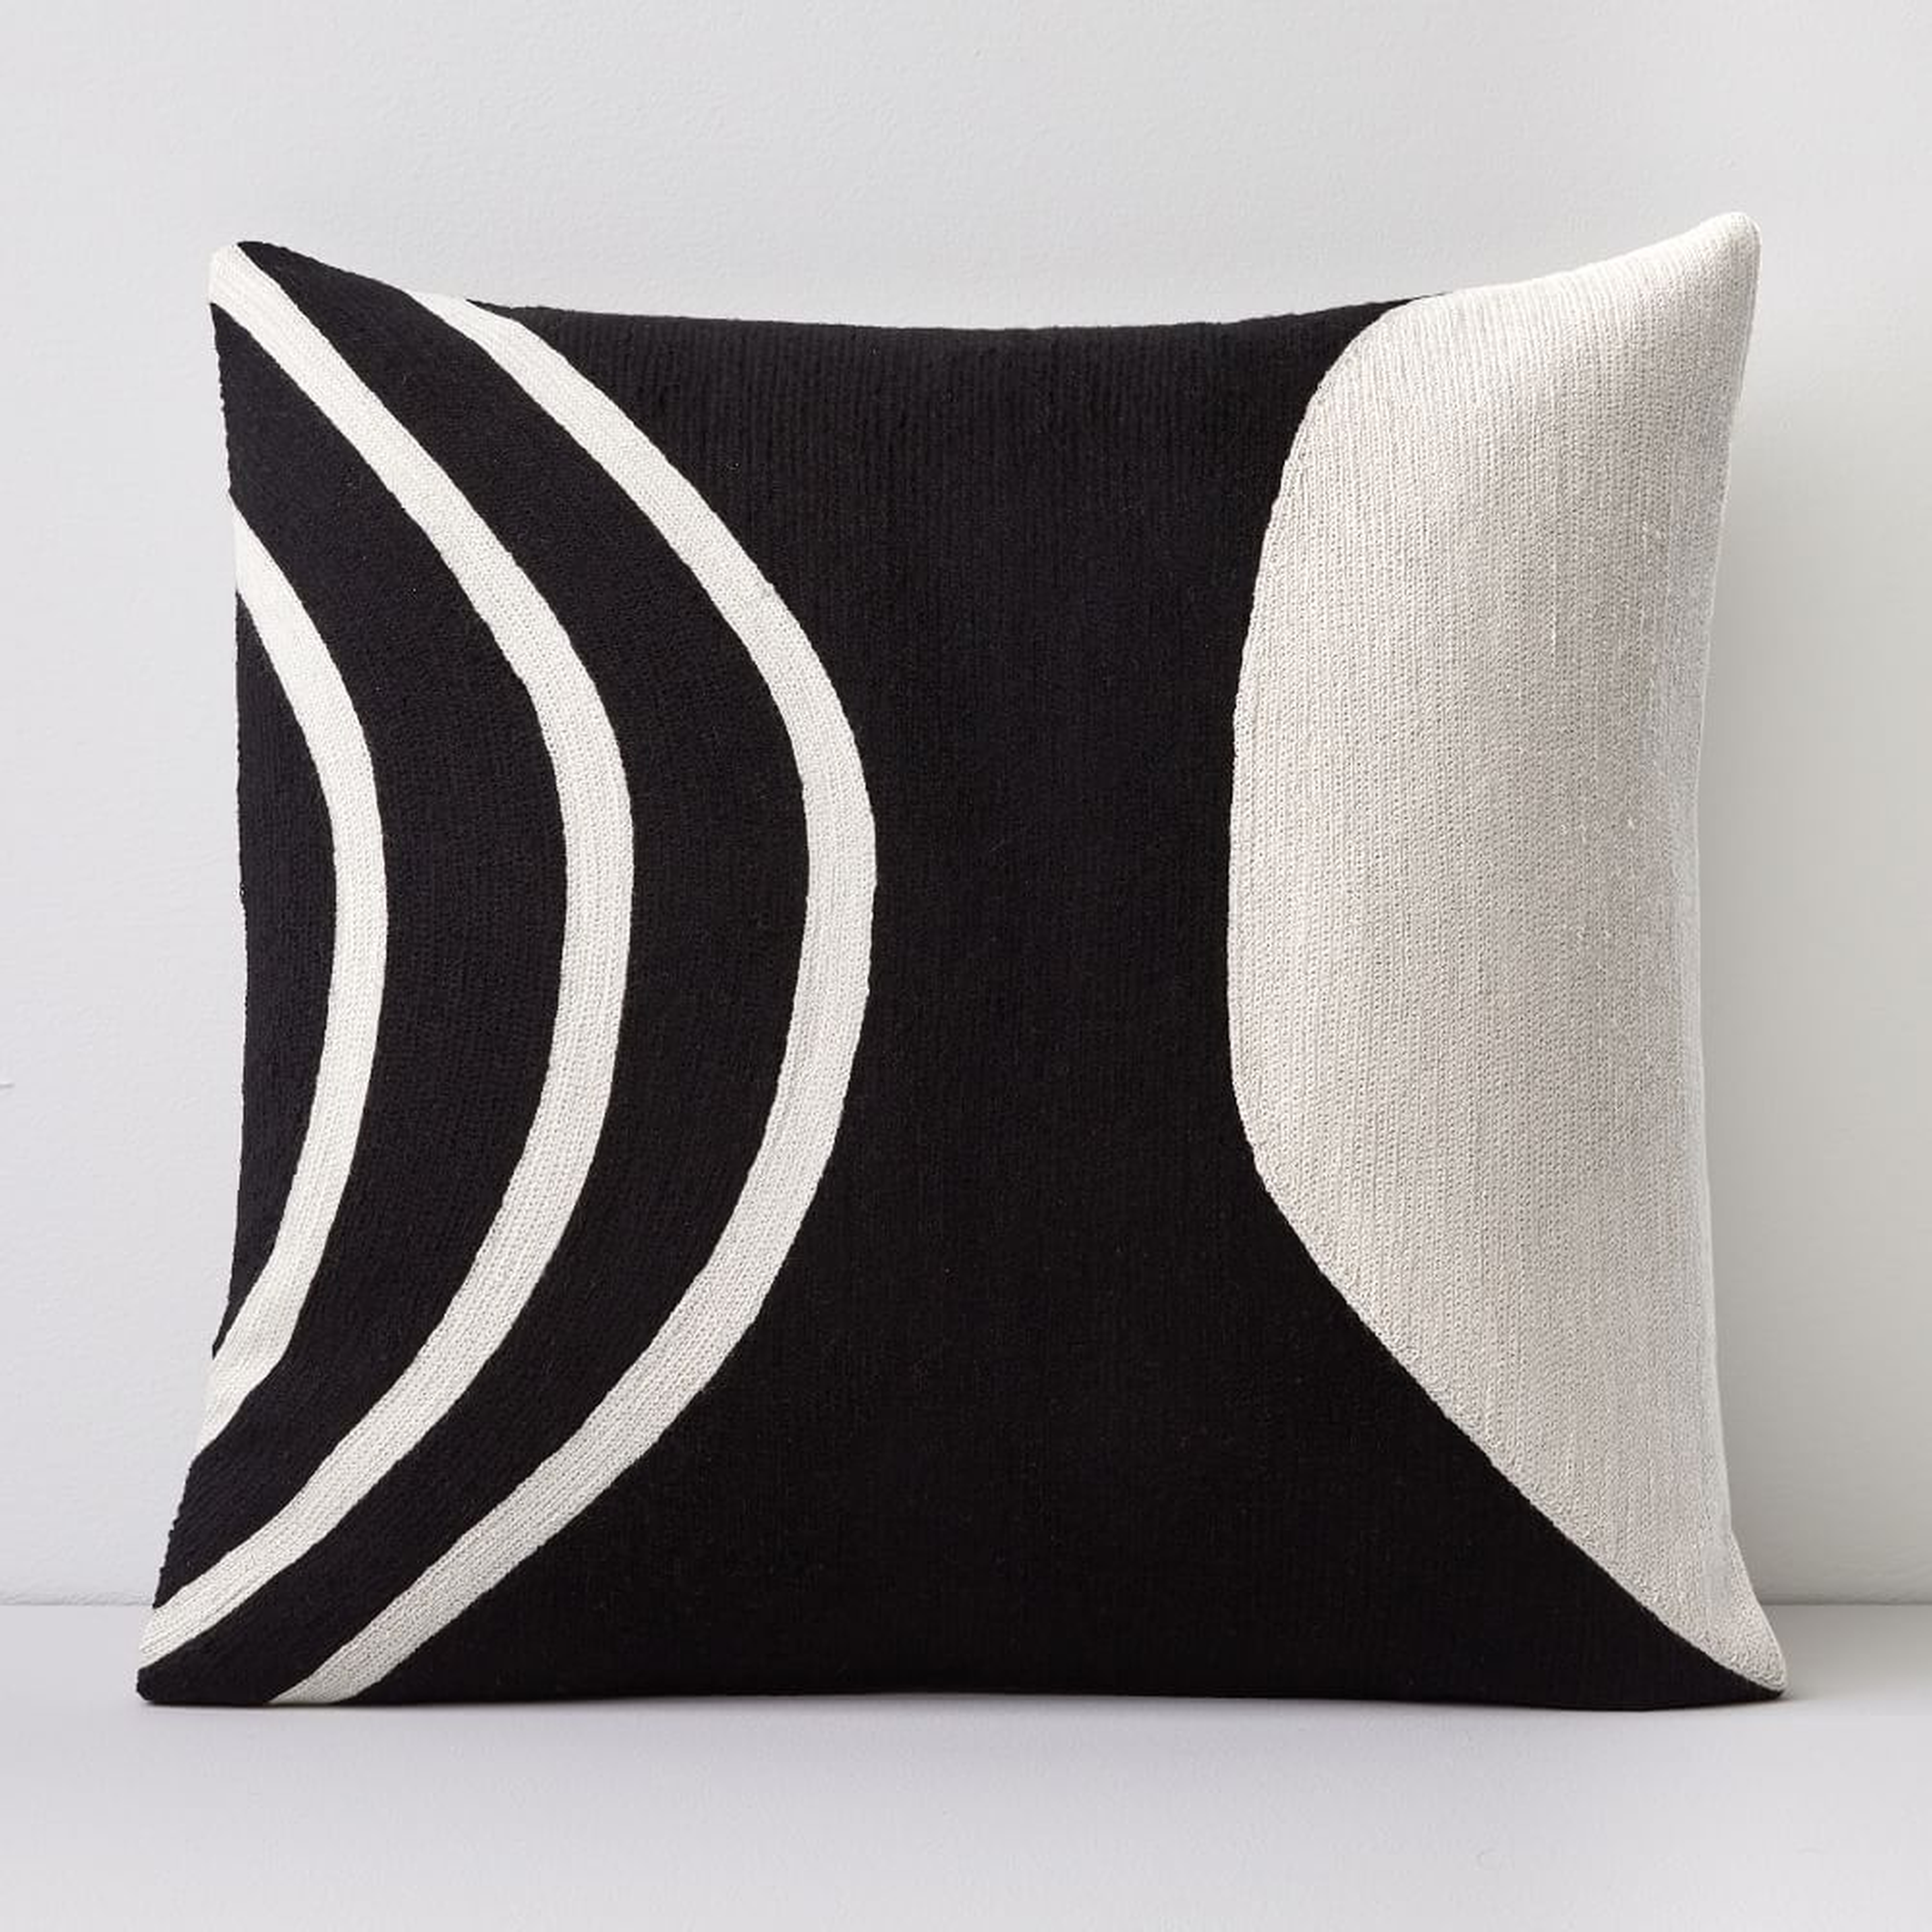 Crewel Rounded Pillow Cover, Black, 18"x18" - West Elm